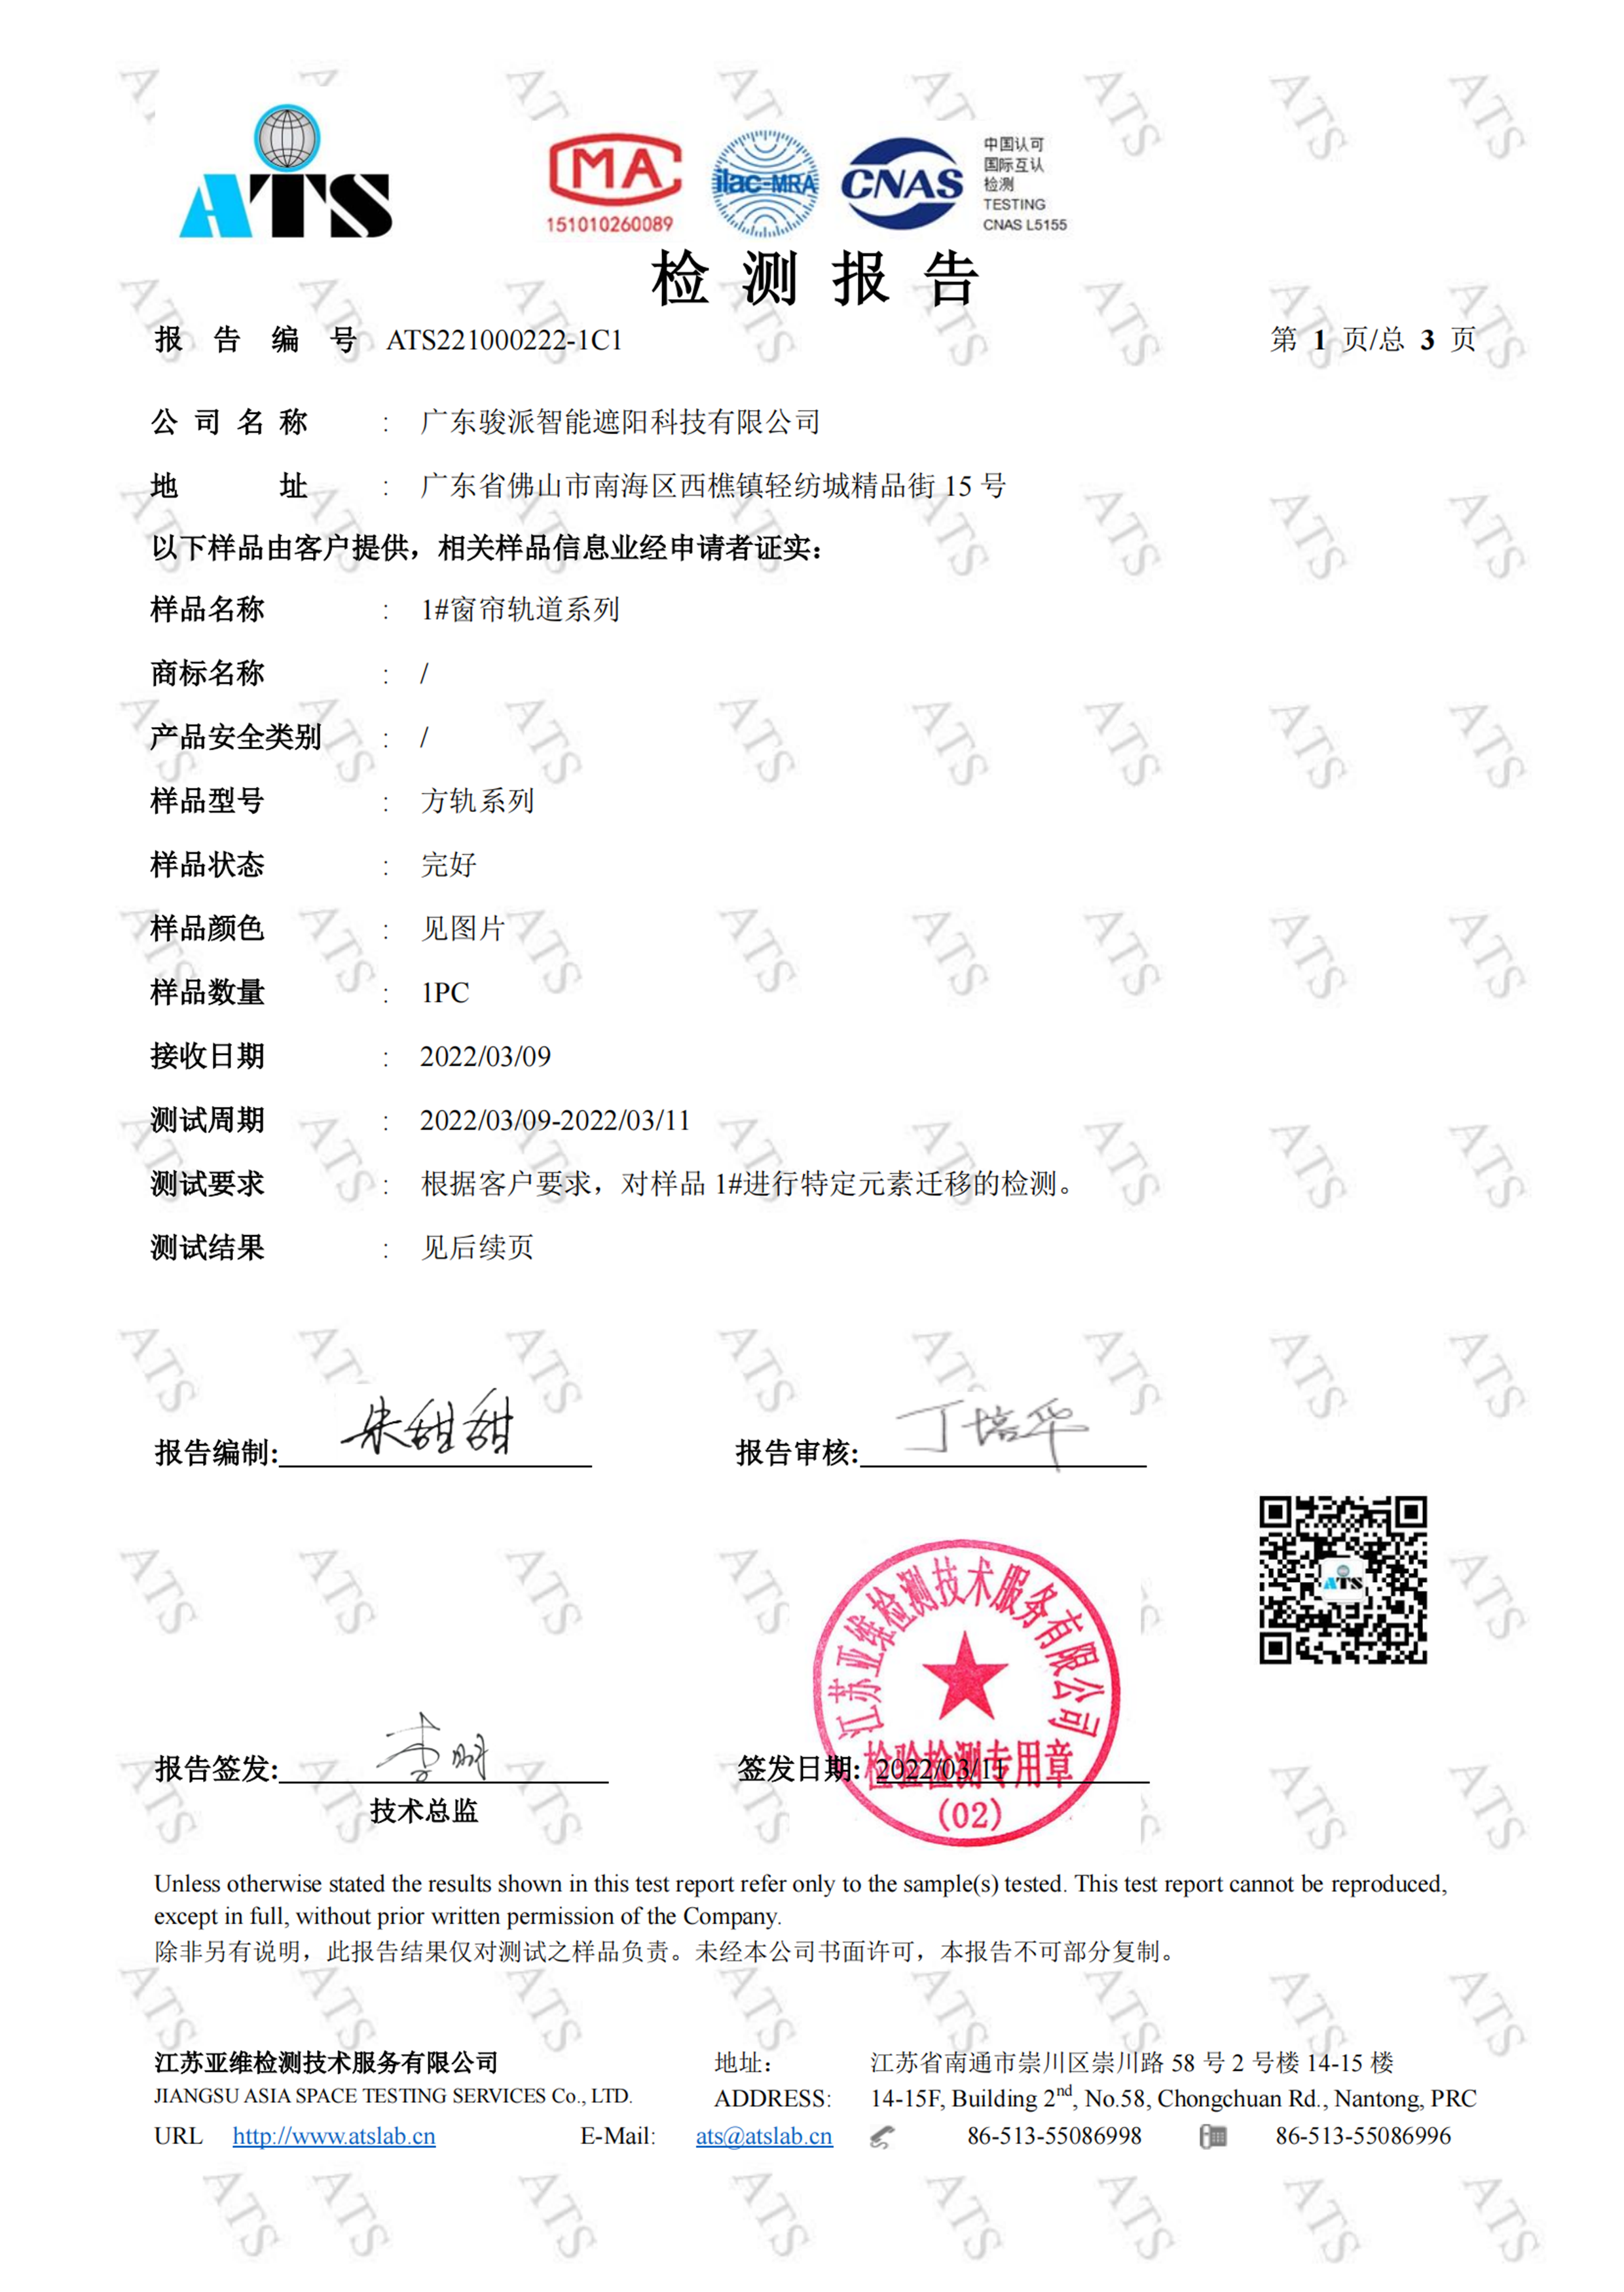 OUR CERTIFICATE (1)